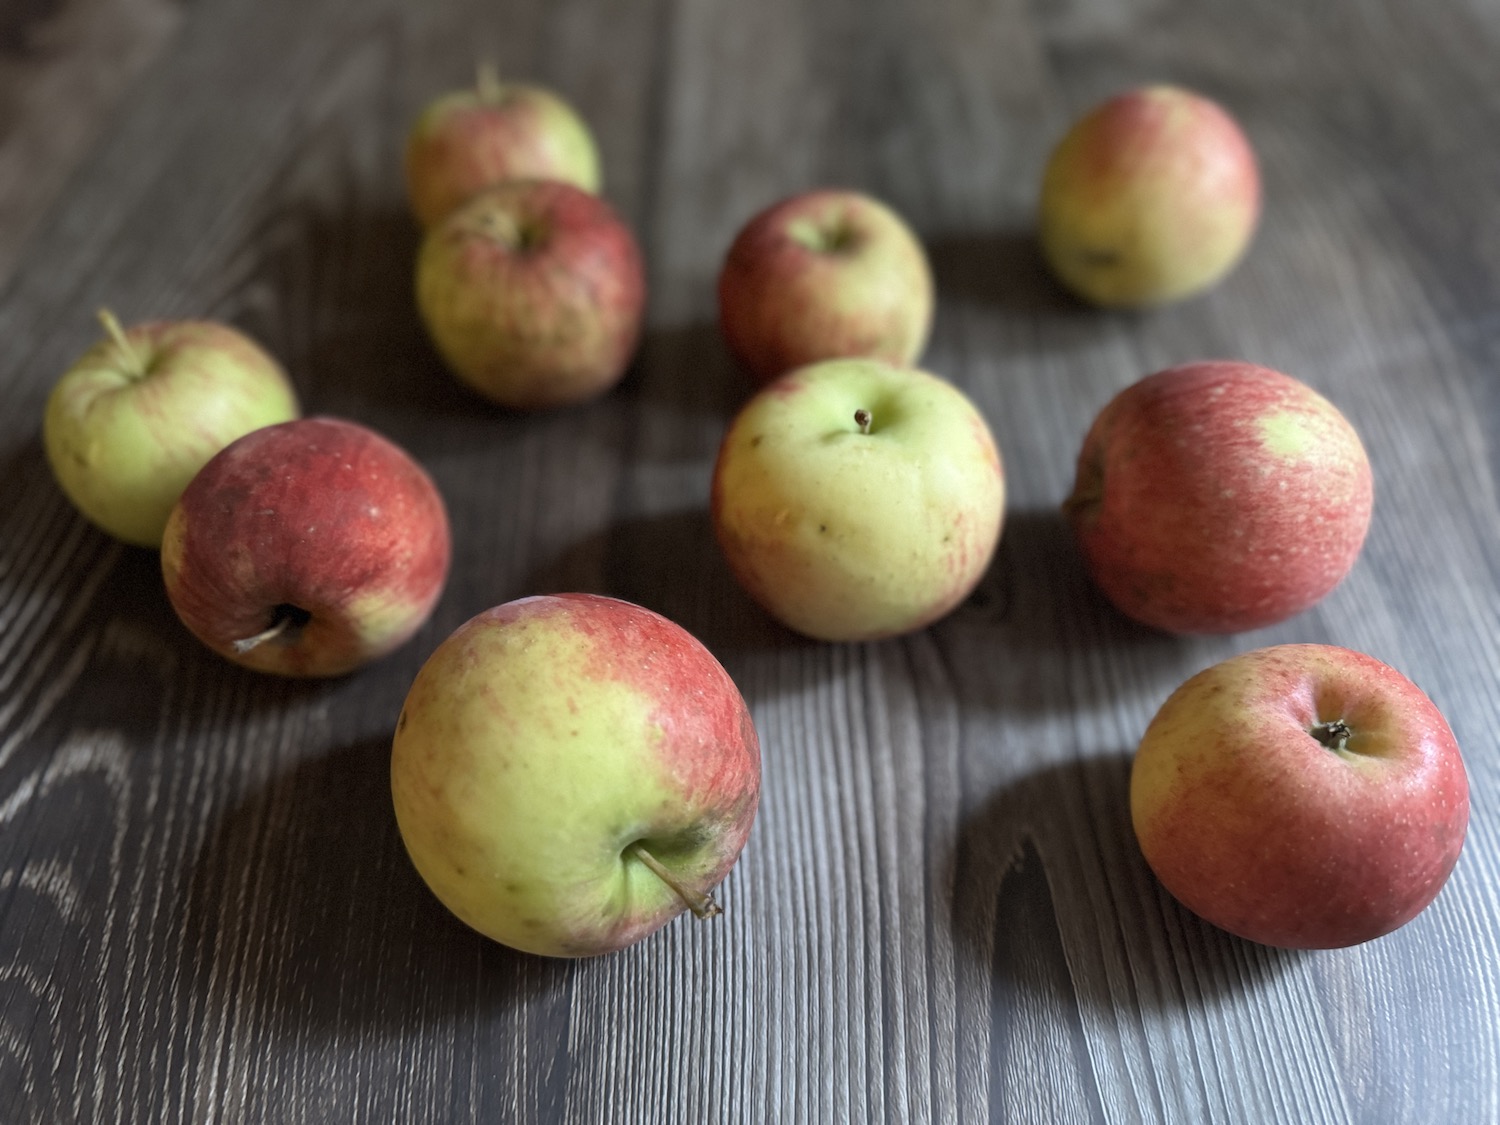 A photo of apples on a wooden background